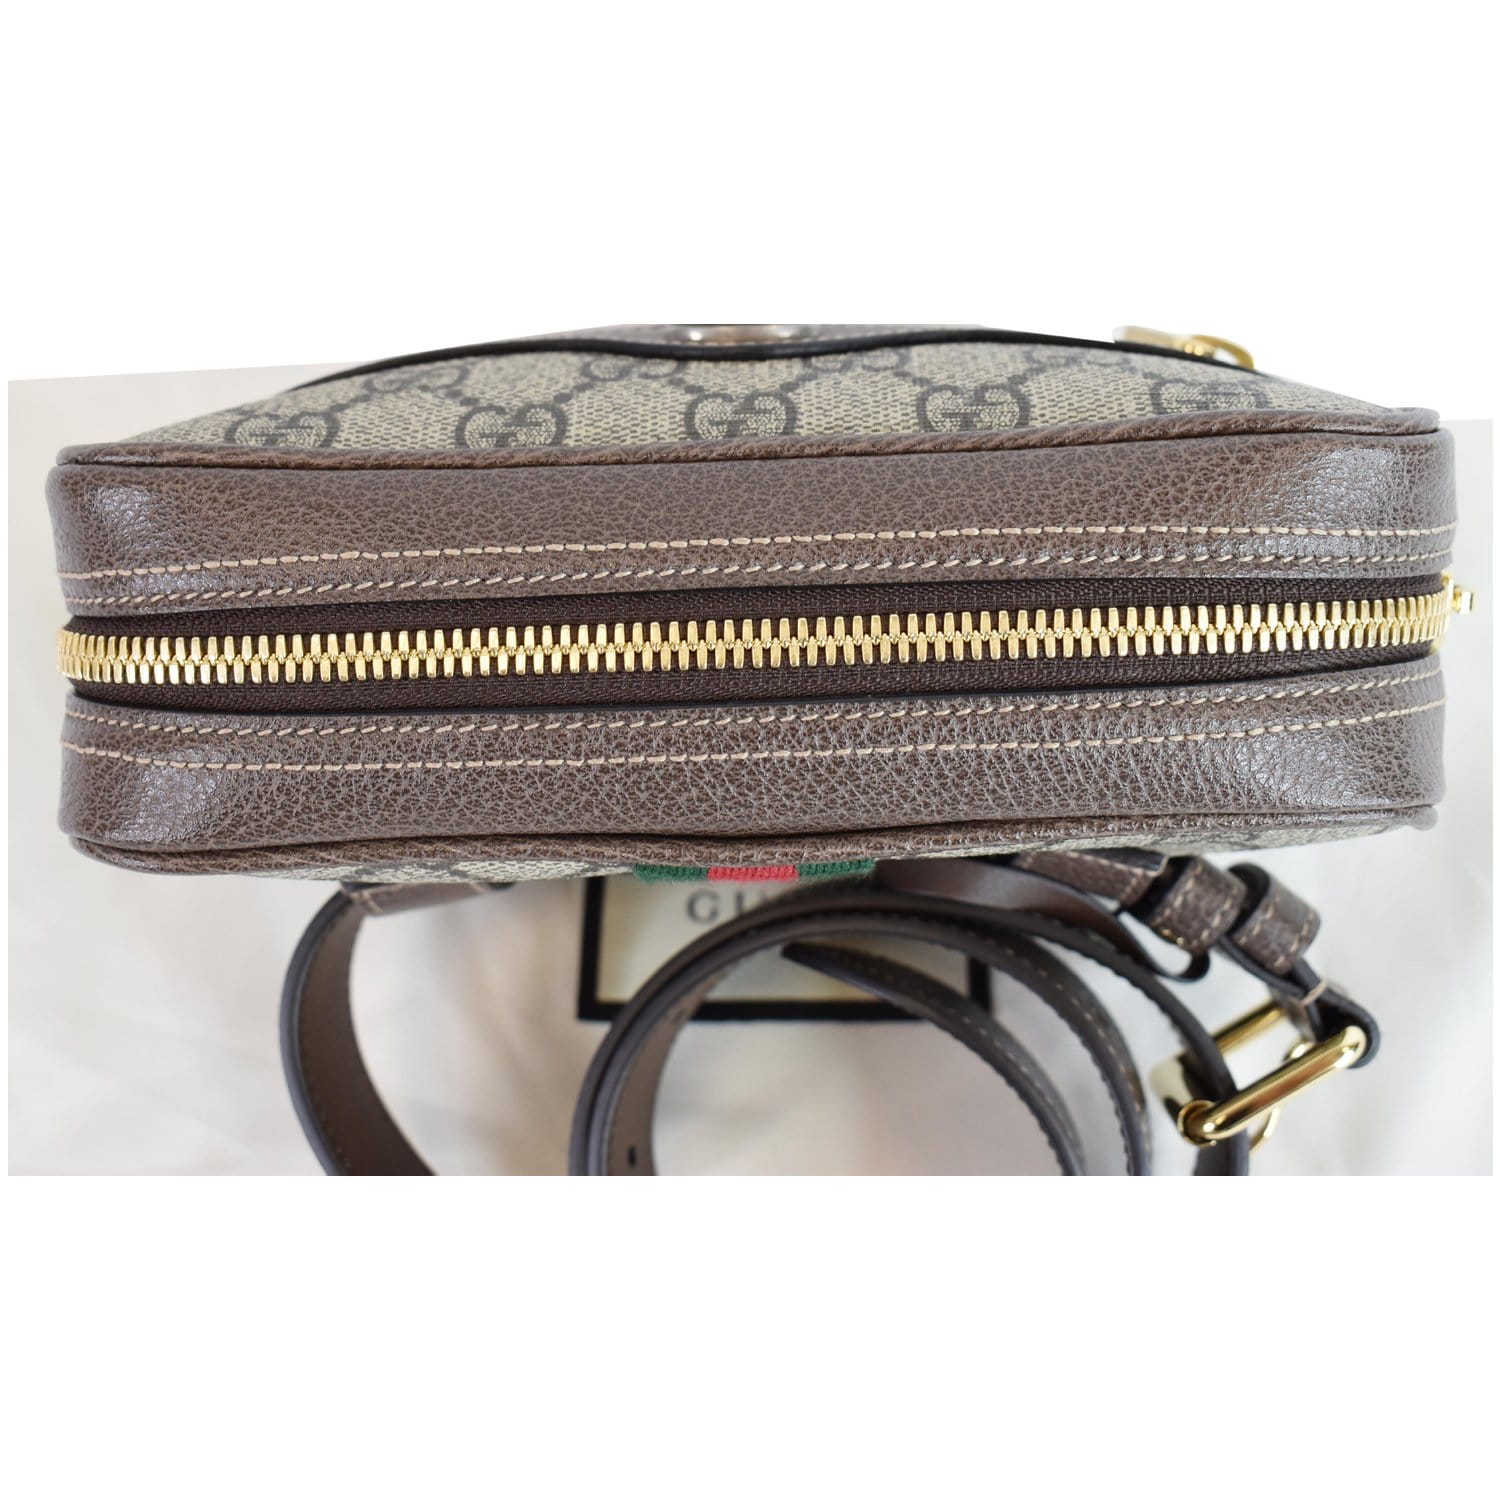 Ophidia belt bag with Web